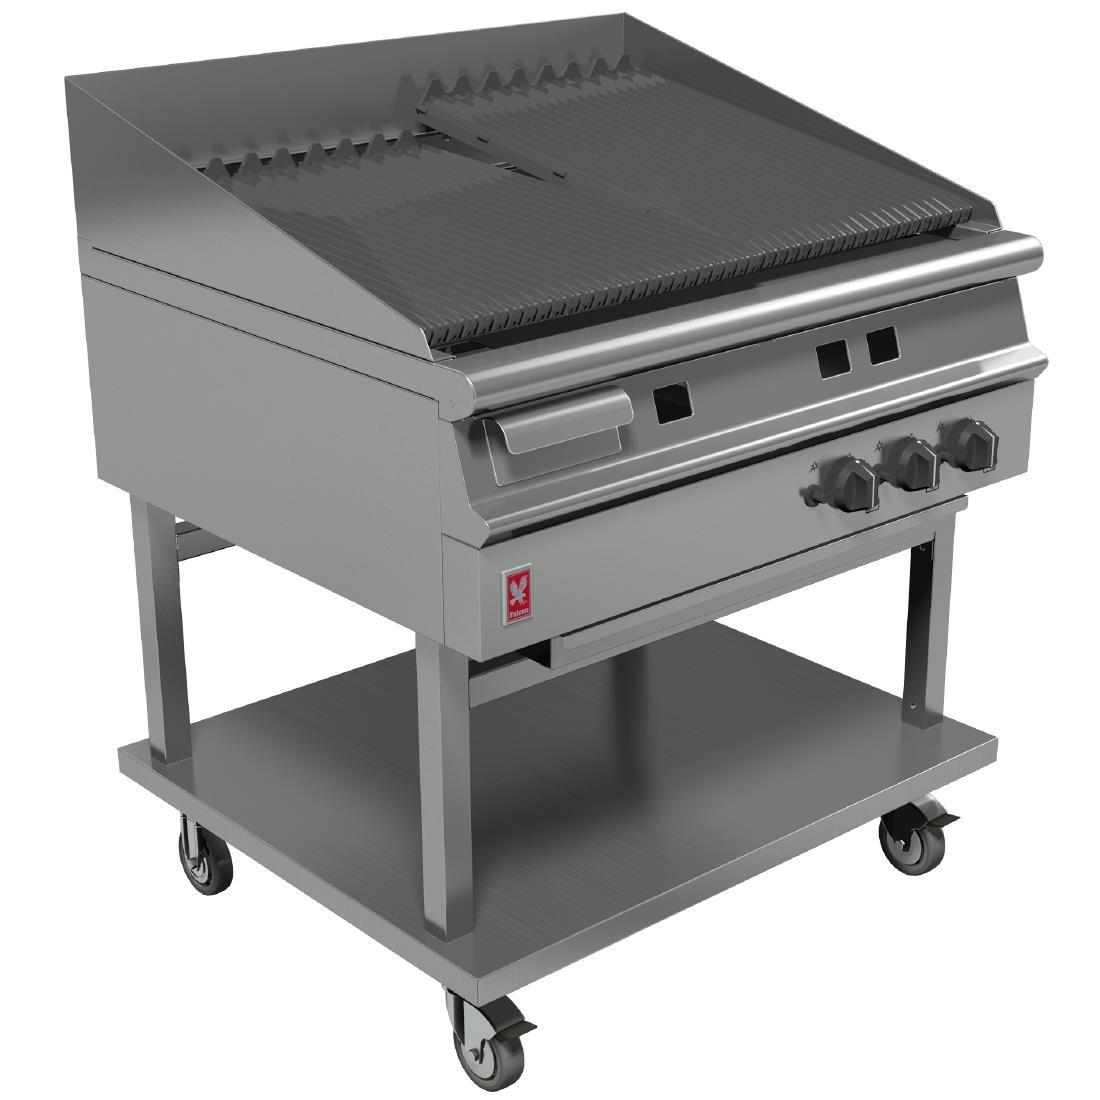 Falcon Dominator Plus Natural Gas Chargrill On Mobile Stand G3925 - GP028-N  - 1